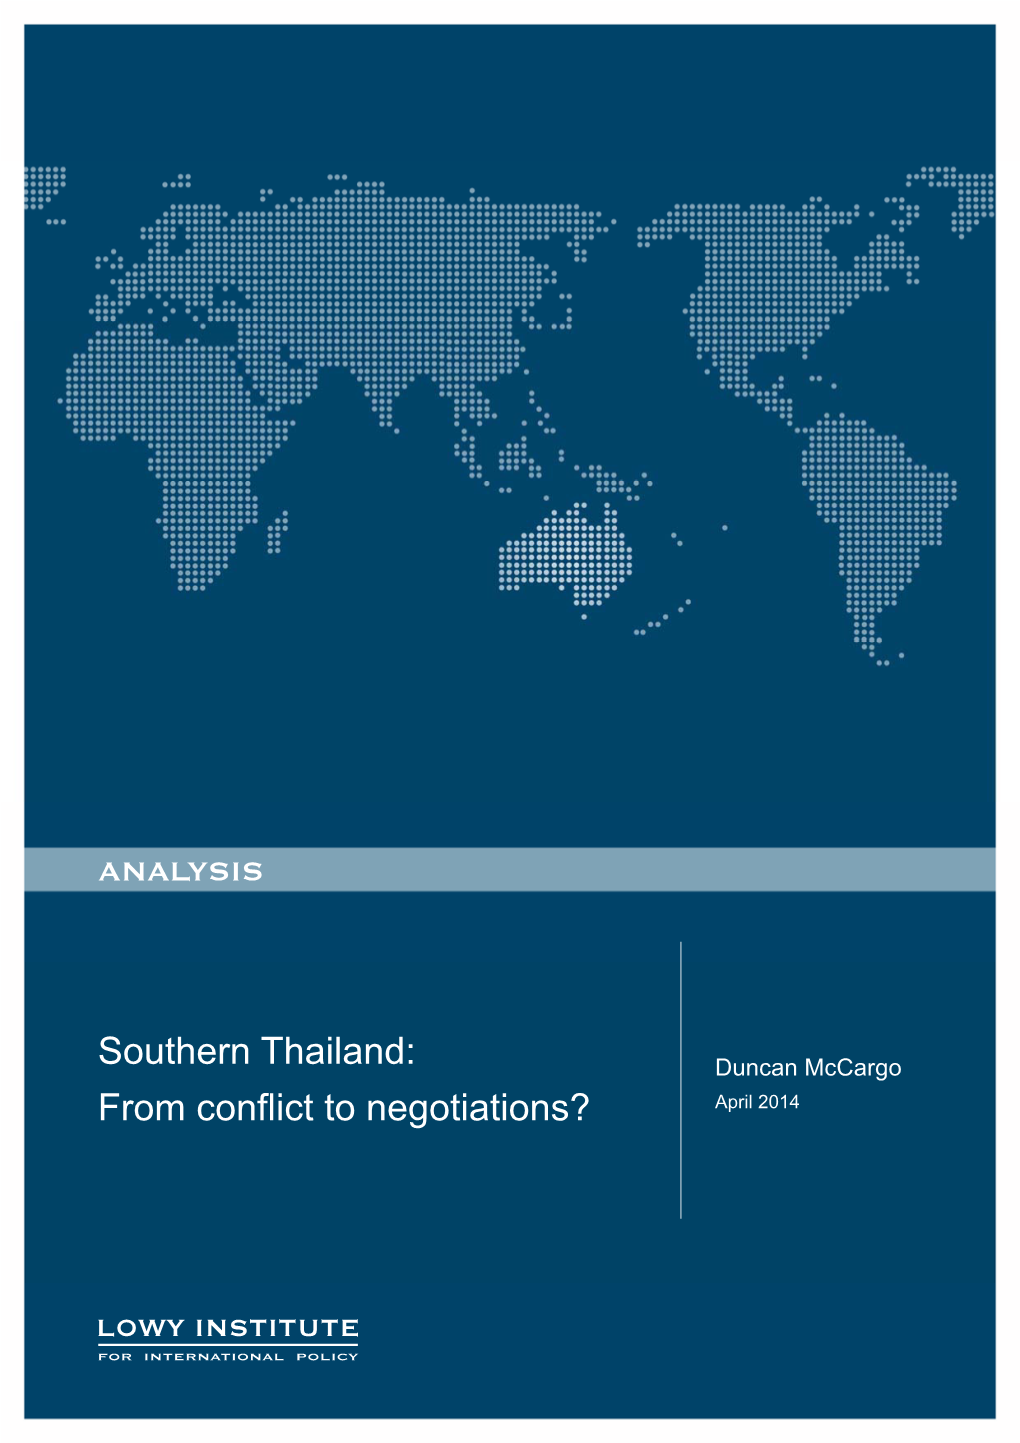 Southern Thailand: from Conflict to Negotiations?